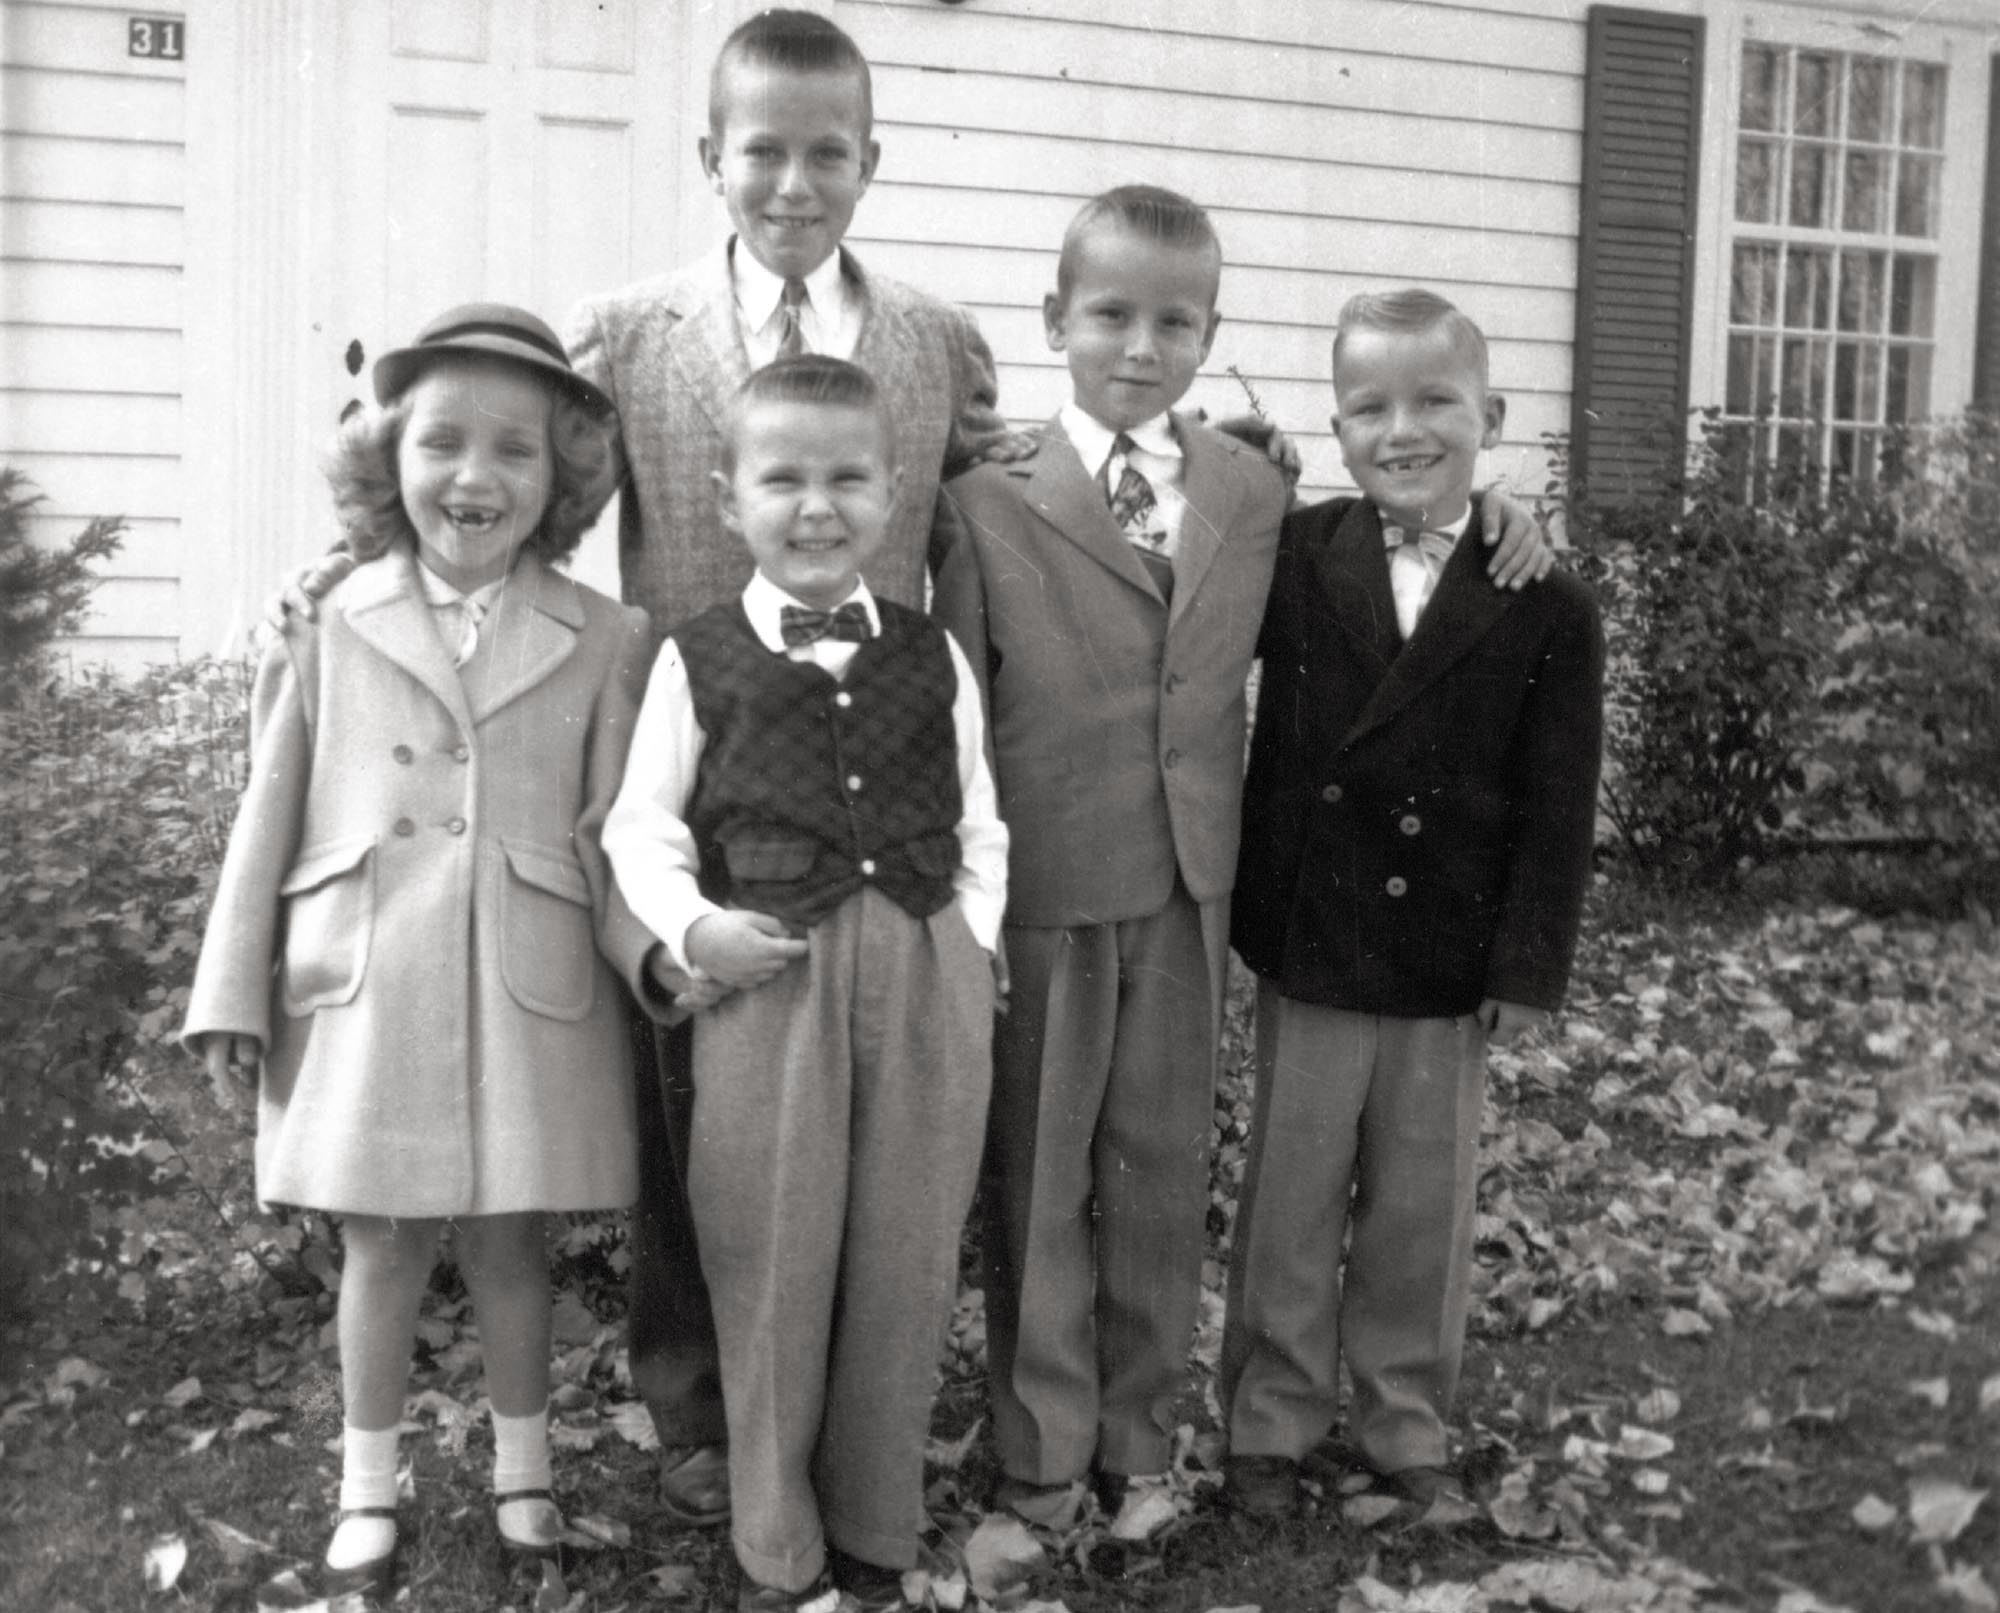 Dad's shot of myself, brothers and family friends on a Sunday in 1957. 